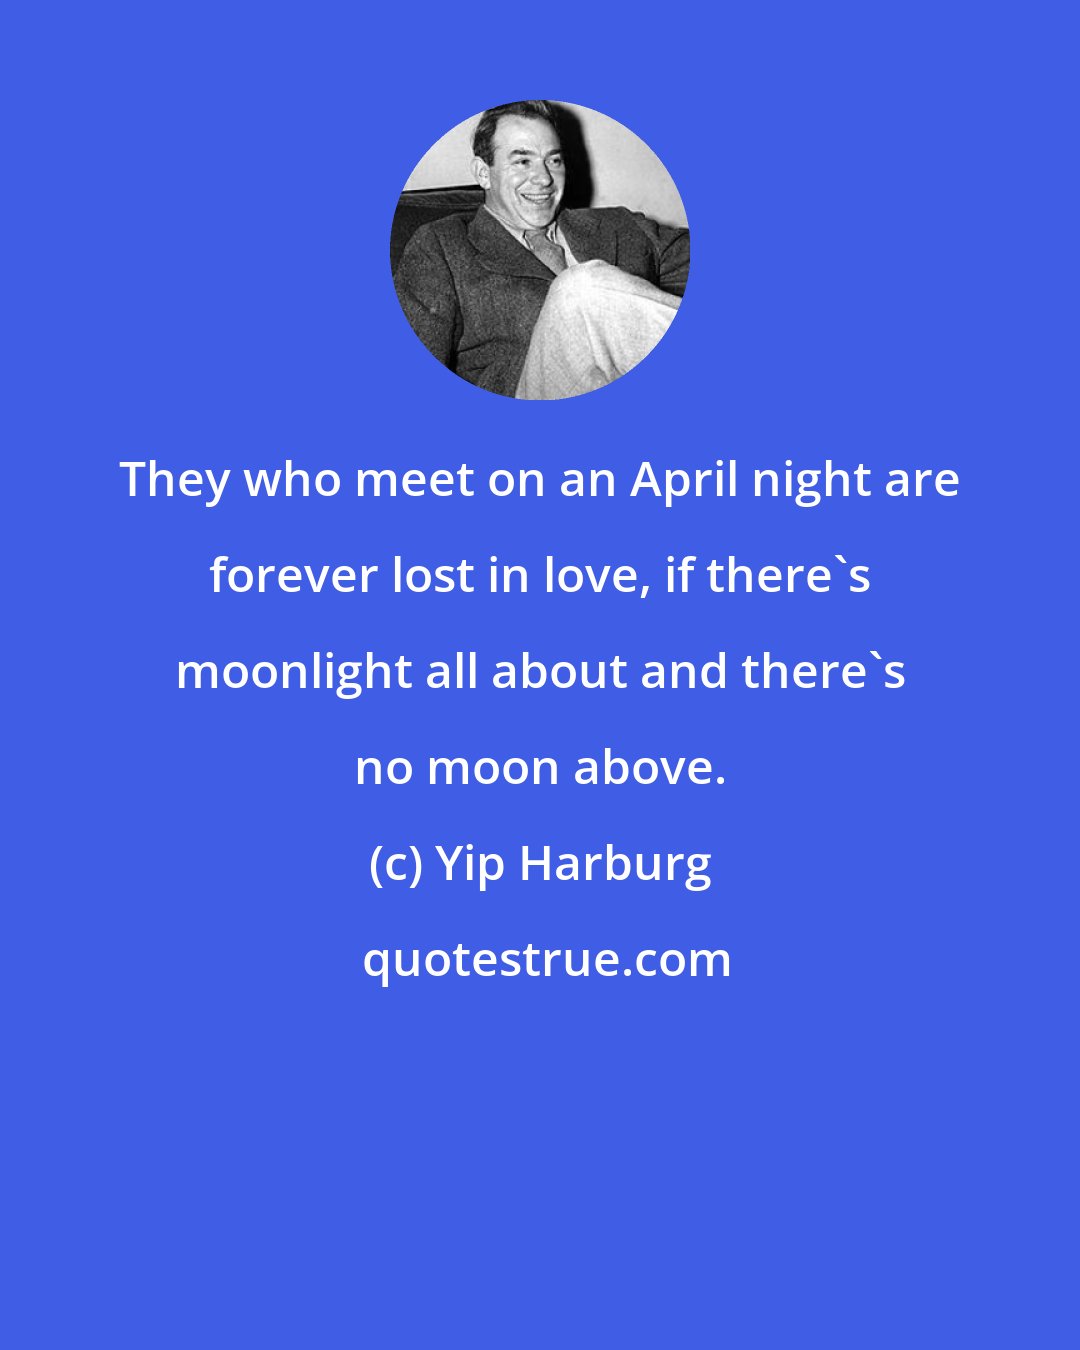 Yip Harburg: They who meet on an April night are forever lost in love, if there's moonlight all about and there's no moon above.